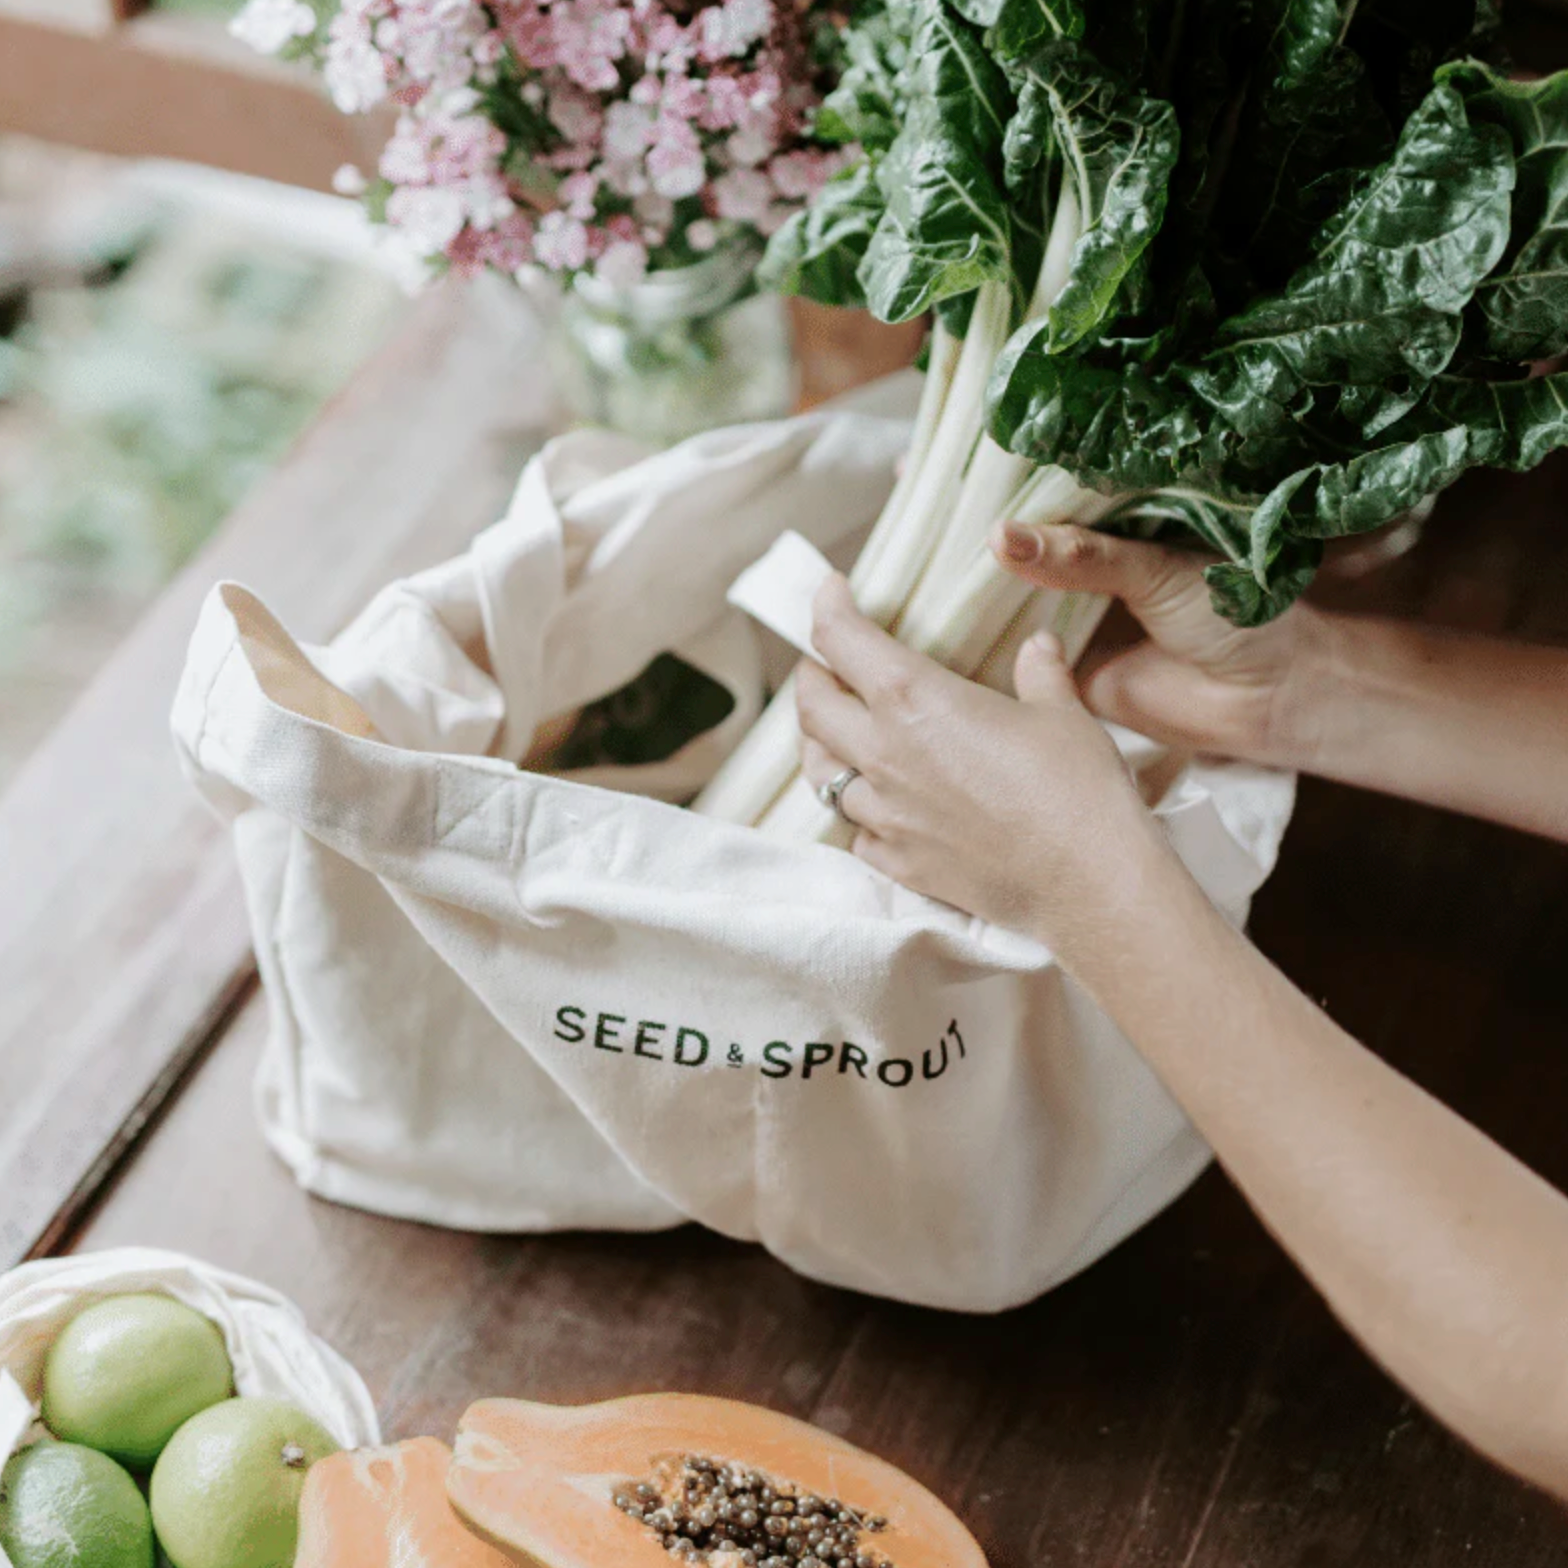 SEED & SPROUT POCKET TOTE SHOPPING BAG